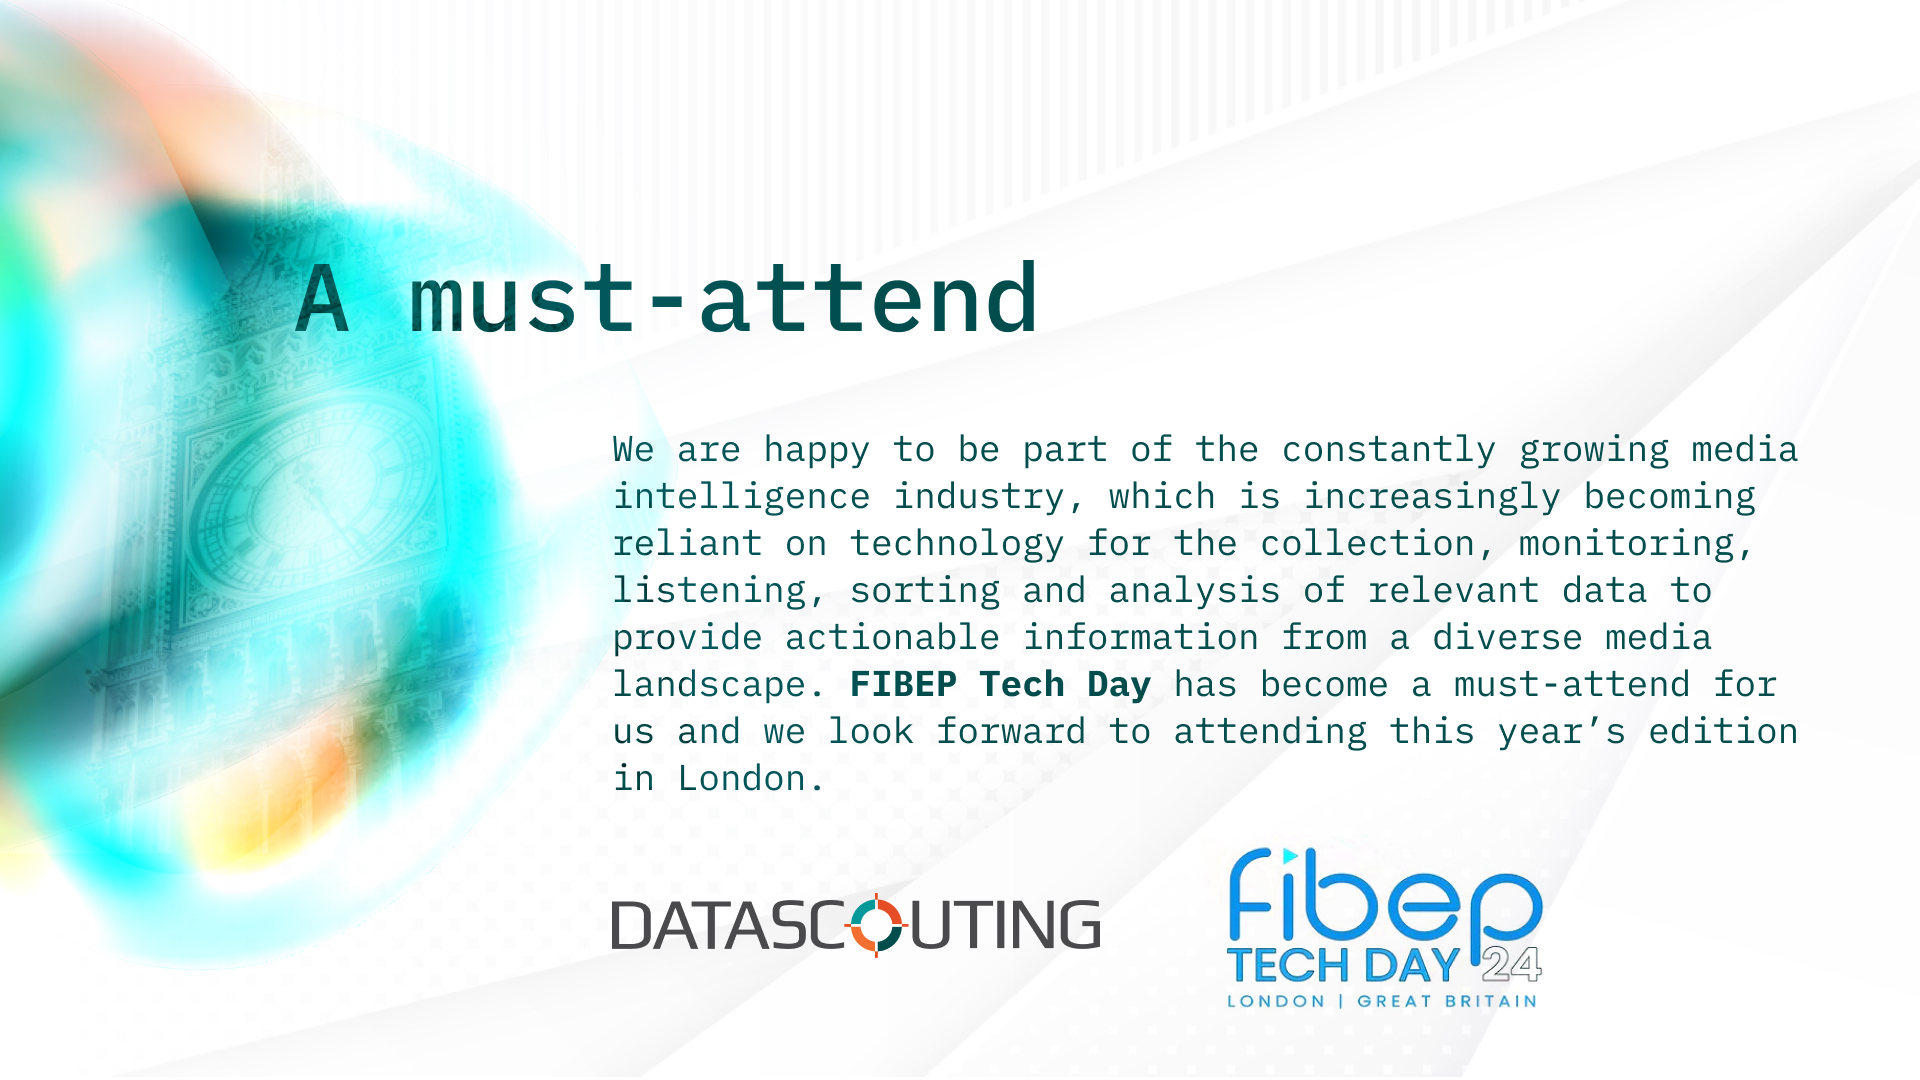 FIBEP Tech Day 2024 | DataScouting at the FIBEP Tech Day 2024